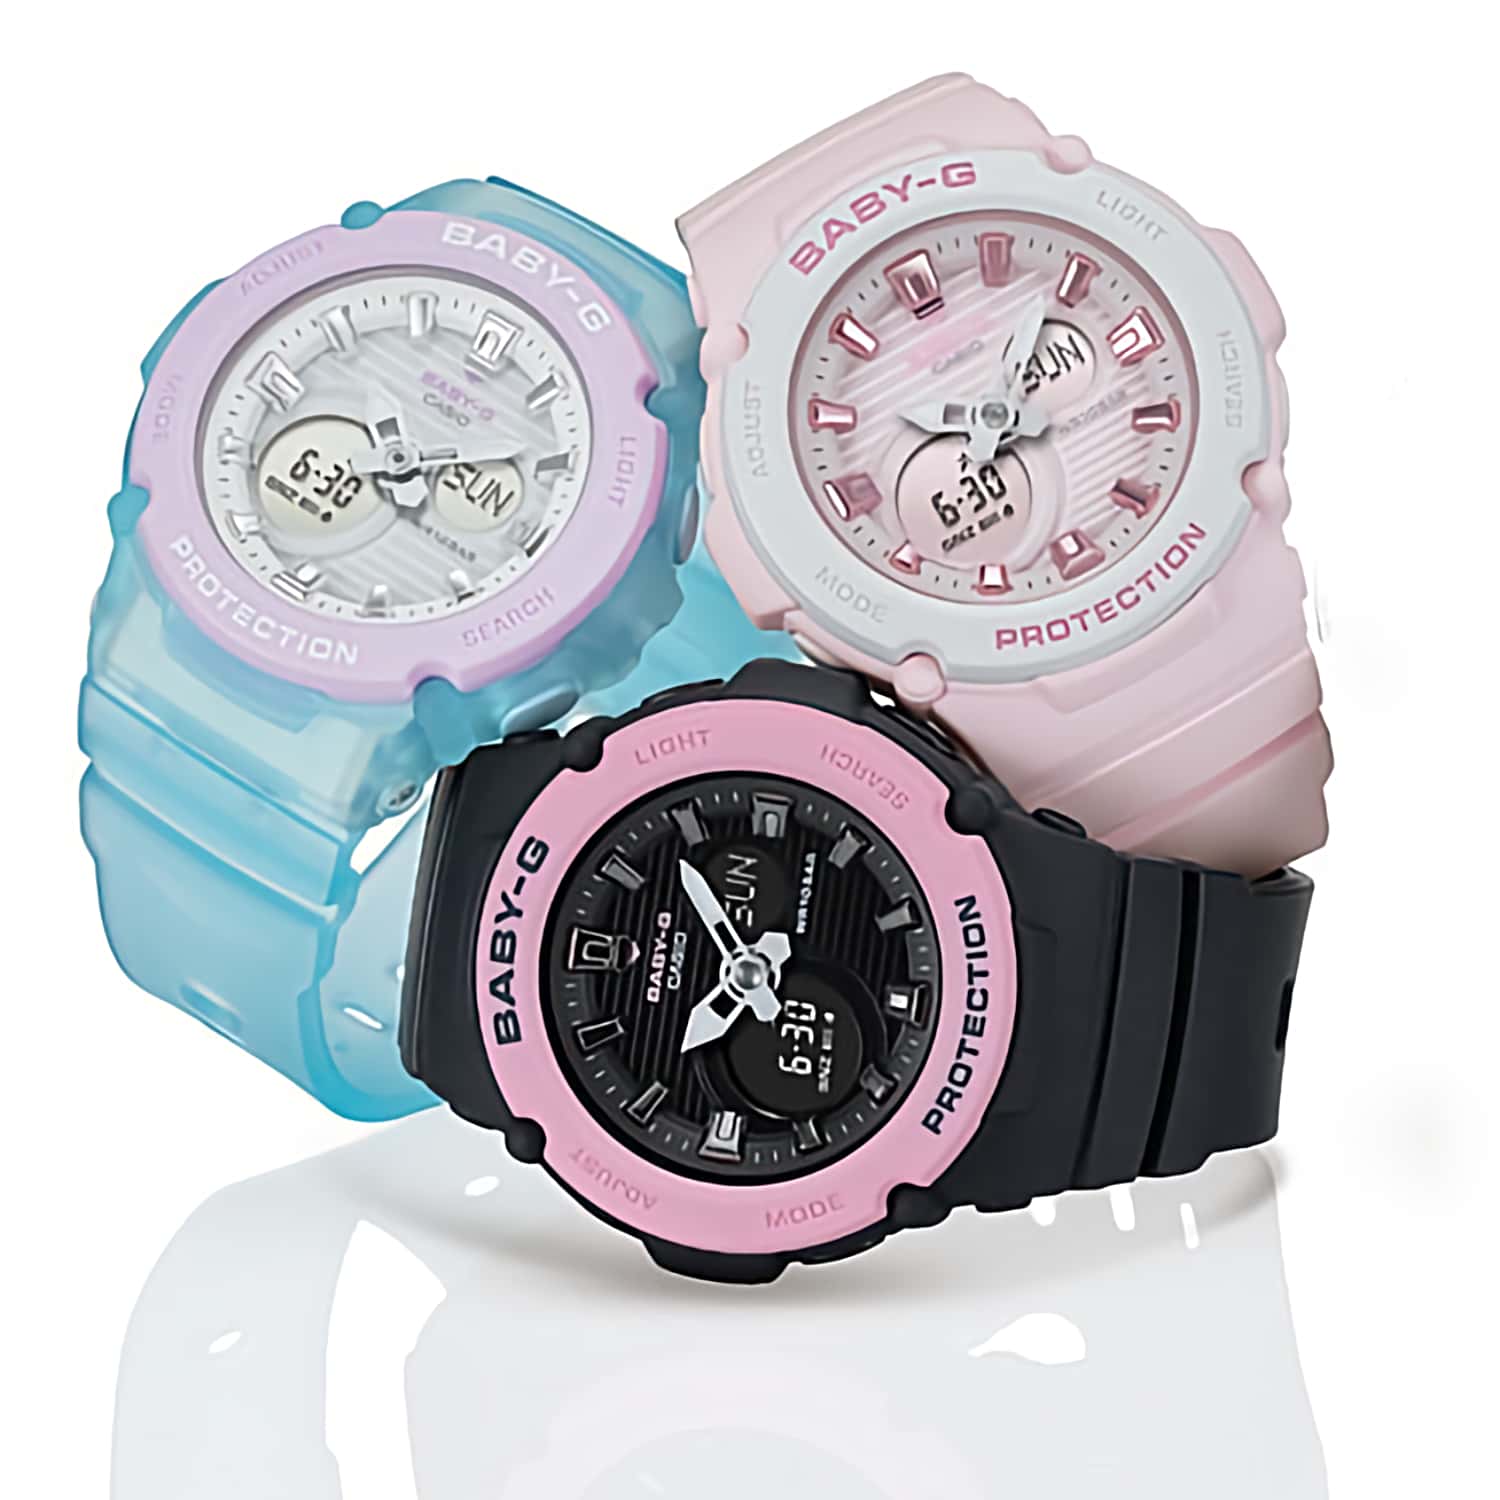 BGA270-1A Casio Baby-G Sports Watch. Introducing new models from BABY-G, the casual watch for active women. Two-piece bezels make it possible to create colourful combinations, and a basic “PROTECTION” design adds to the overall sporty look of these watche